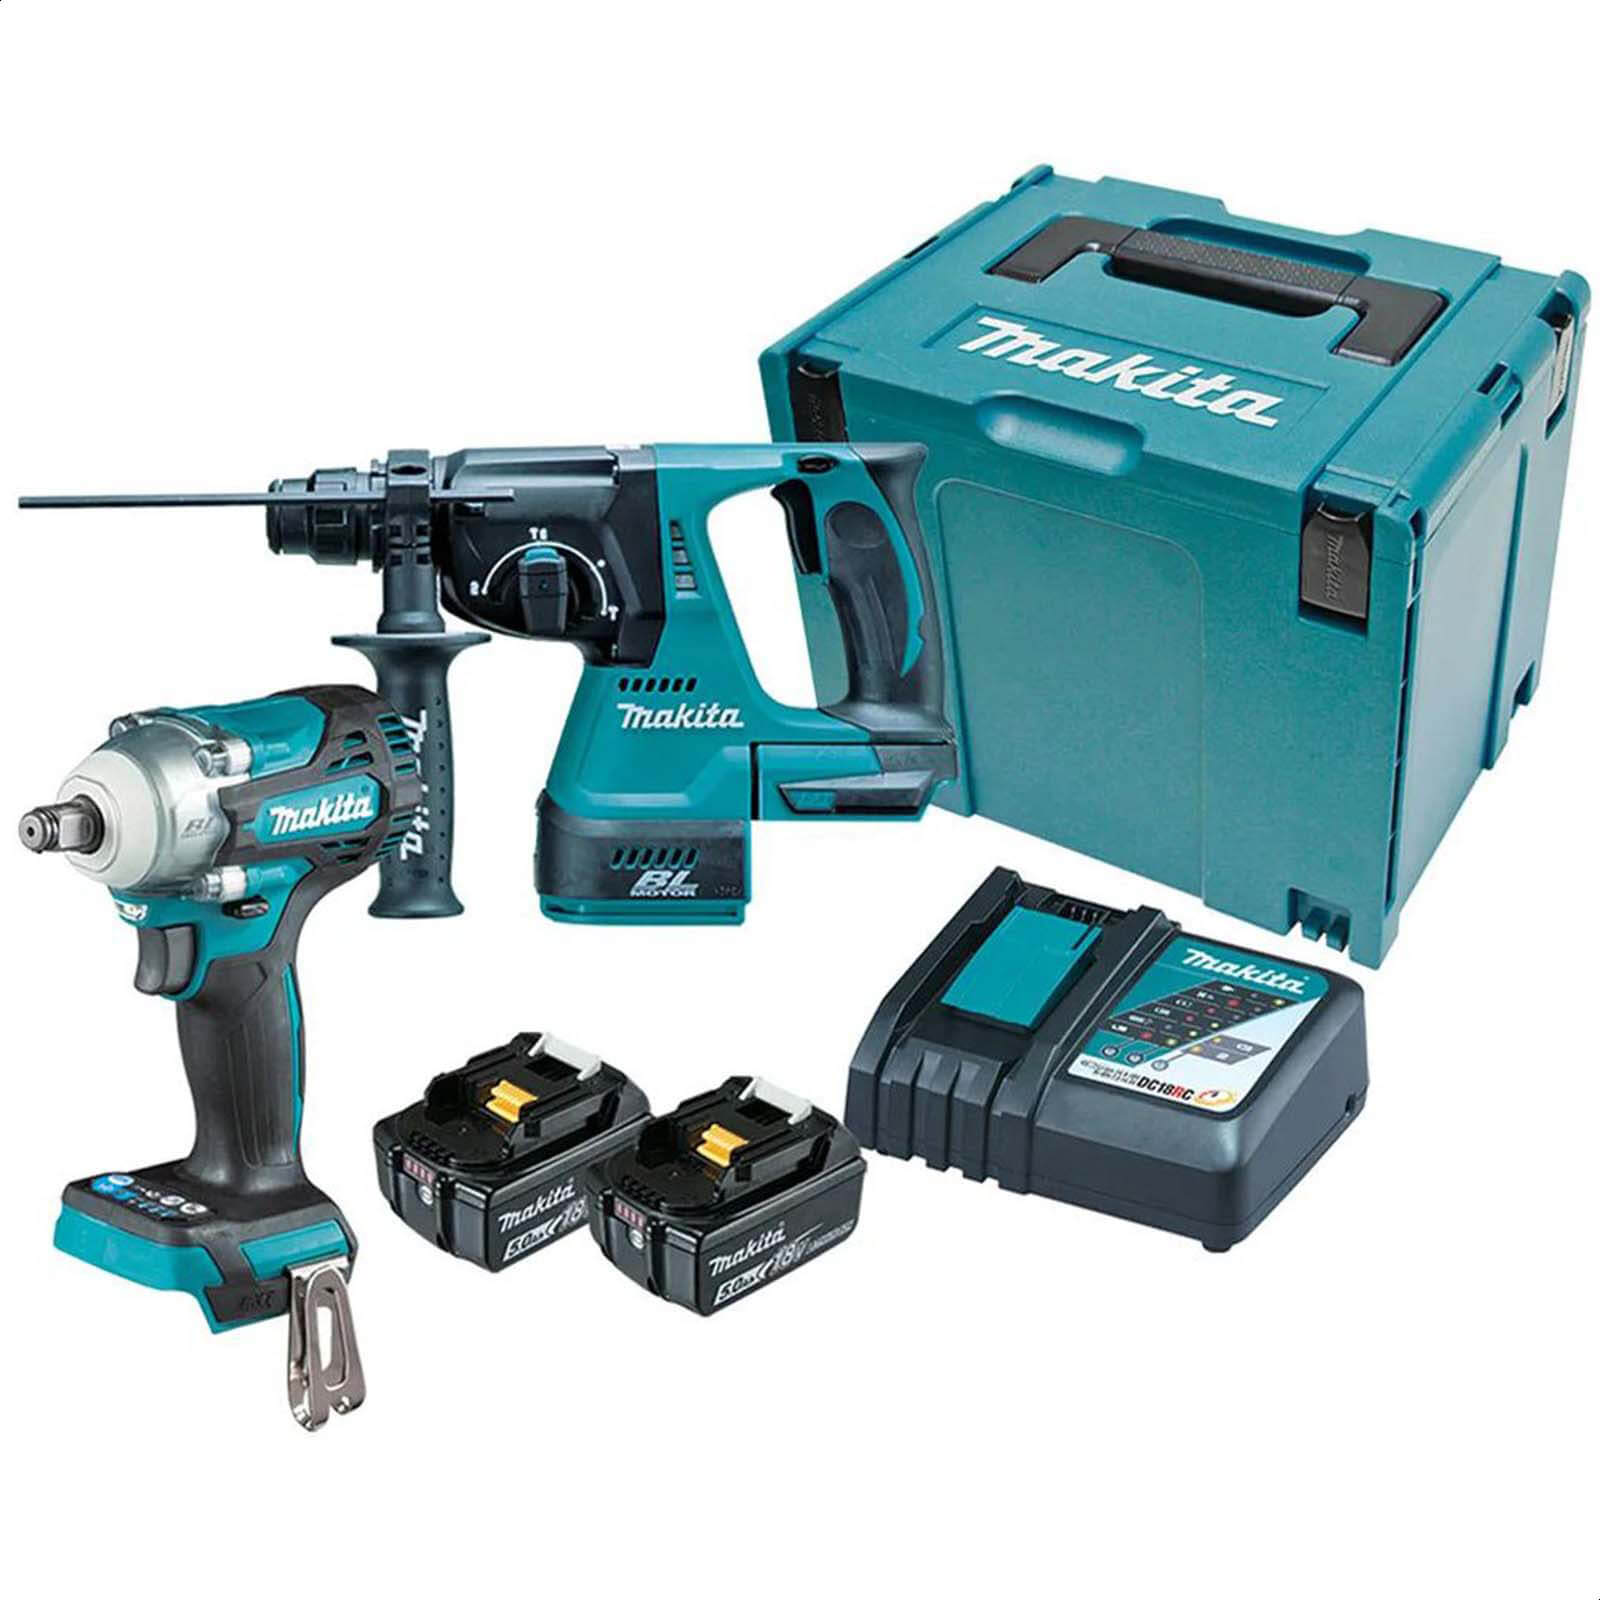 Makita DLX2372TJ 18v LXT Cordless SDS Drill and Impact Wrench Kit 2 x 5ah Li-ion Charger Case